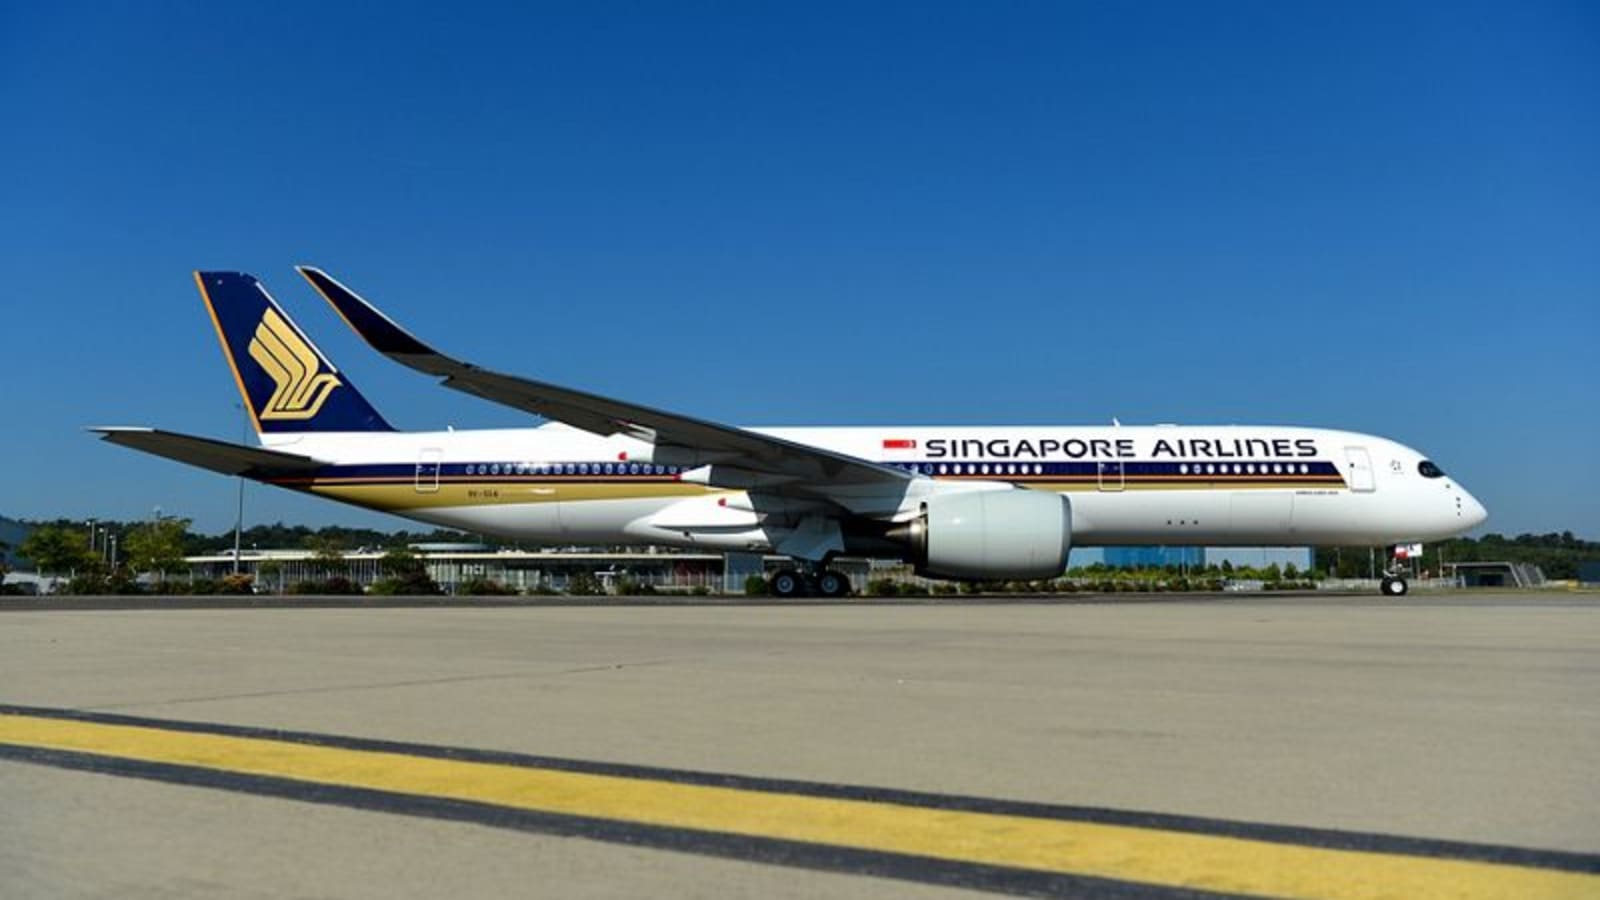 Singapore Airlines takes delivery of a plane to fly world's longest direct route